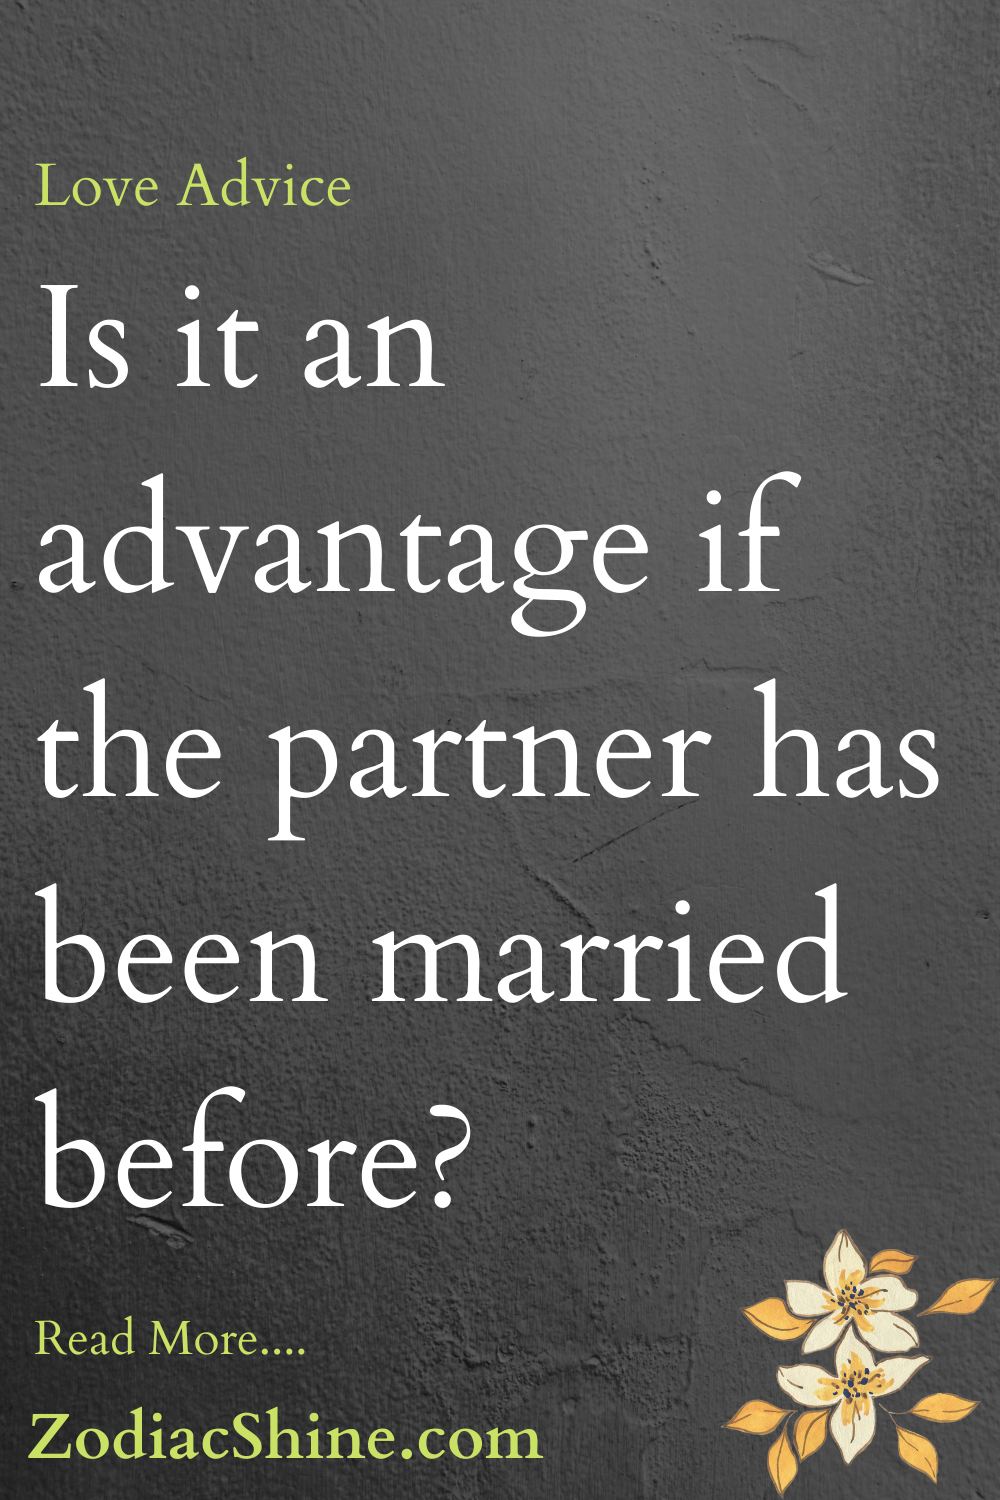 Is it an advantage if the partner has been married before?